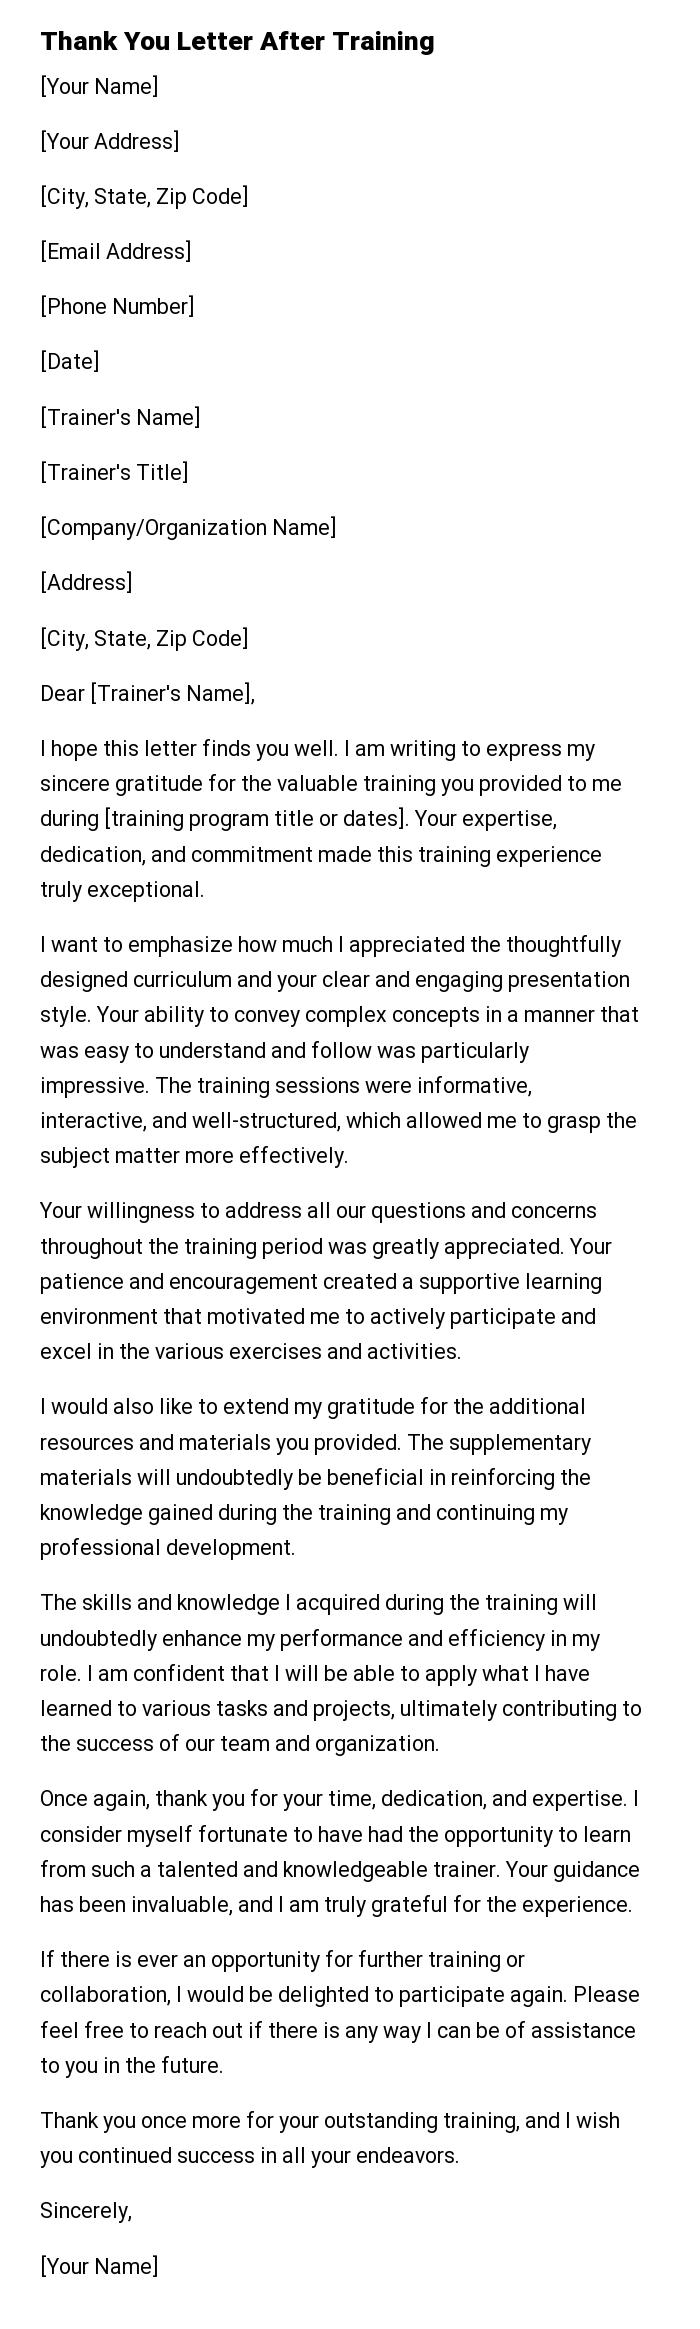 Thank You Letter After Training